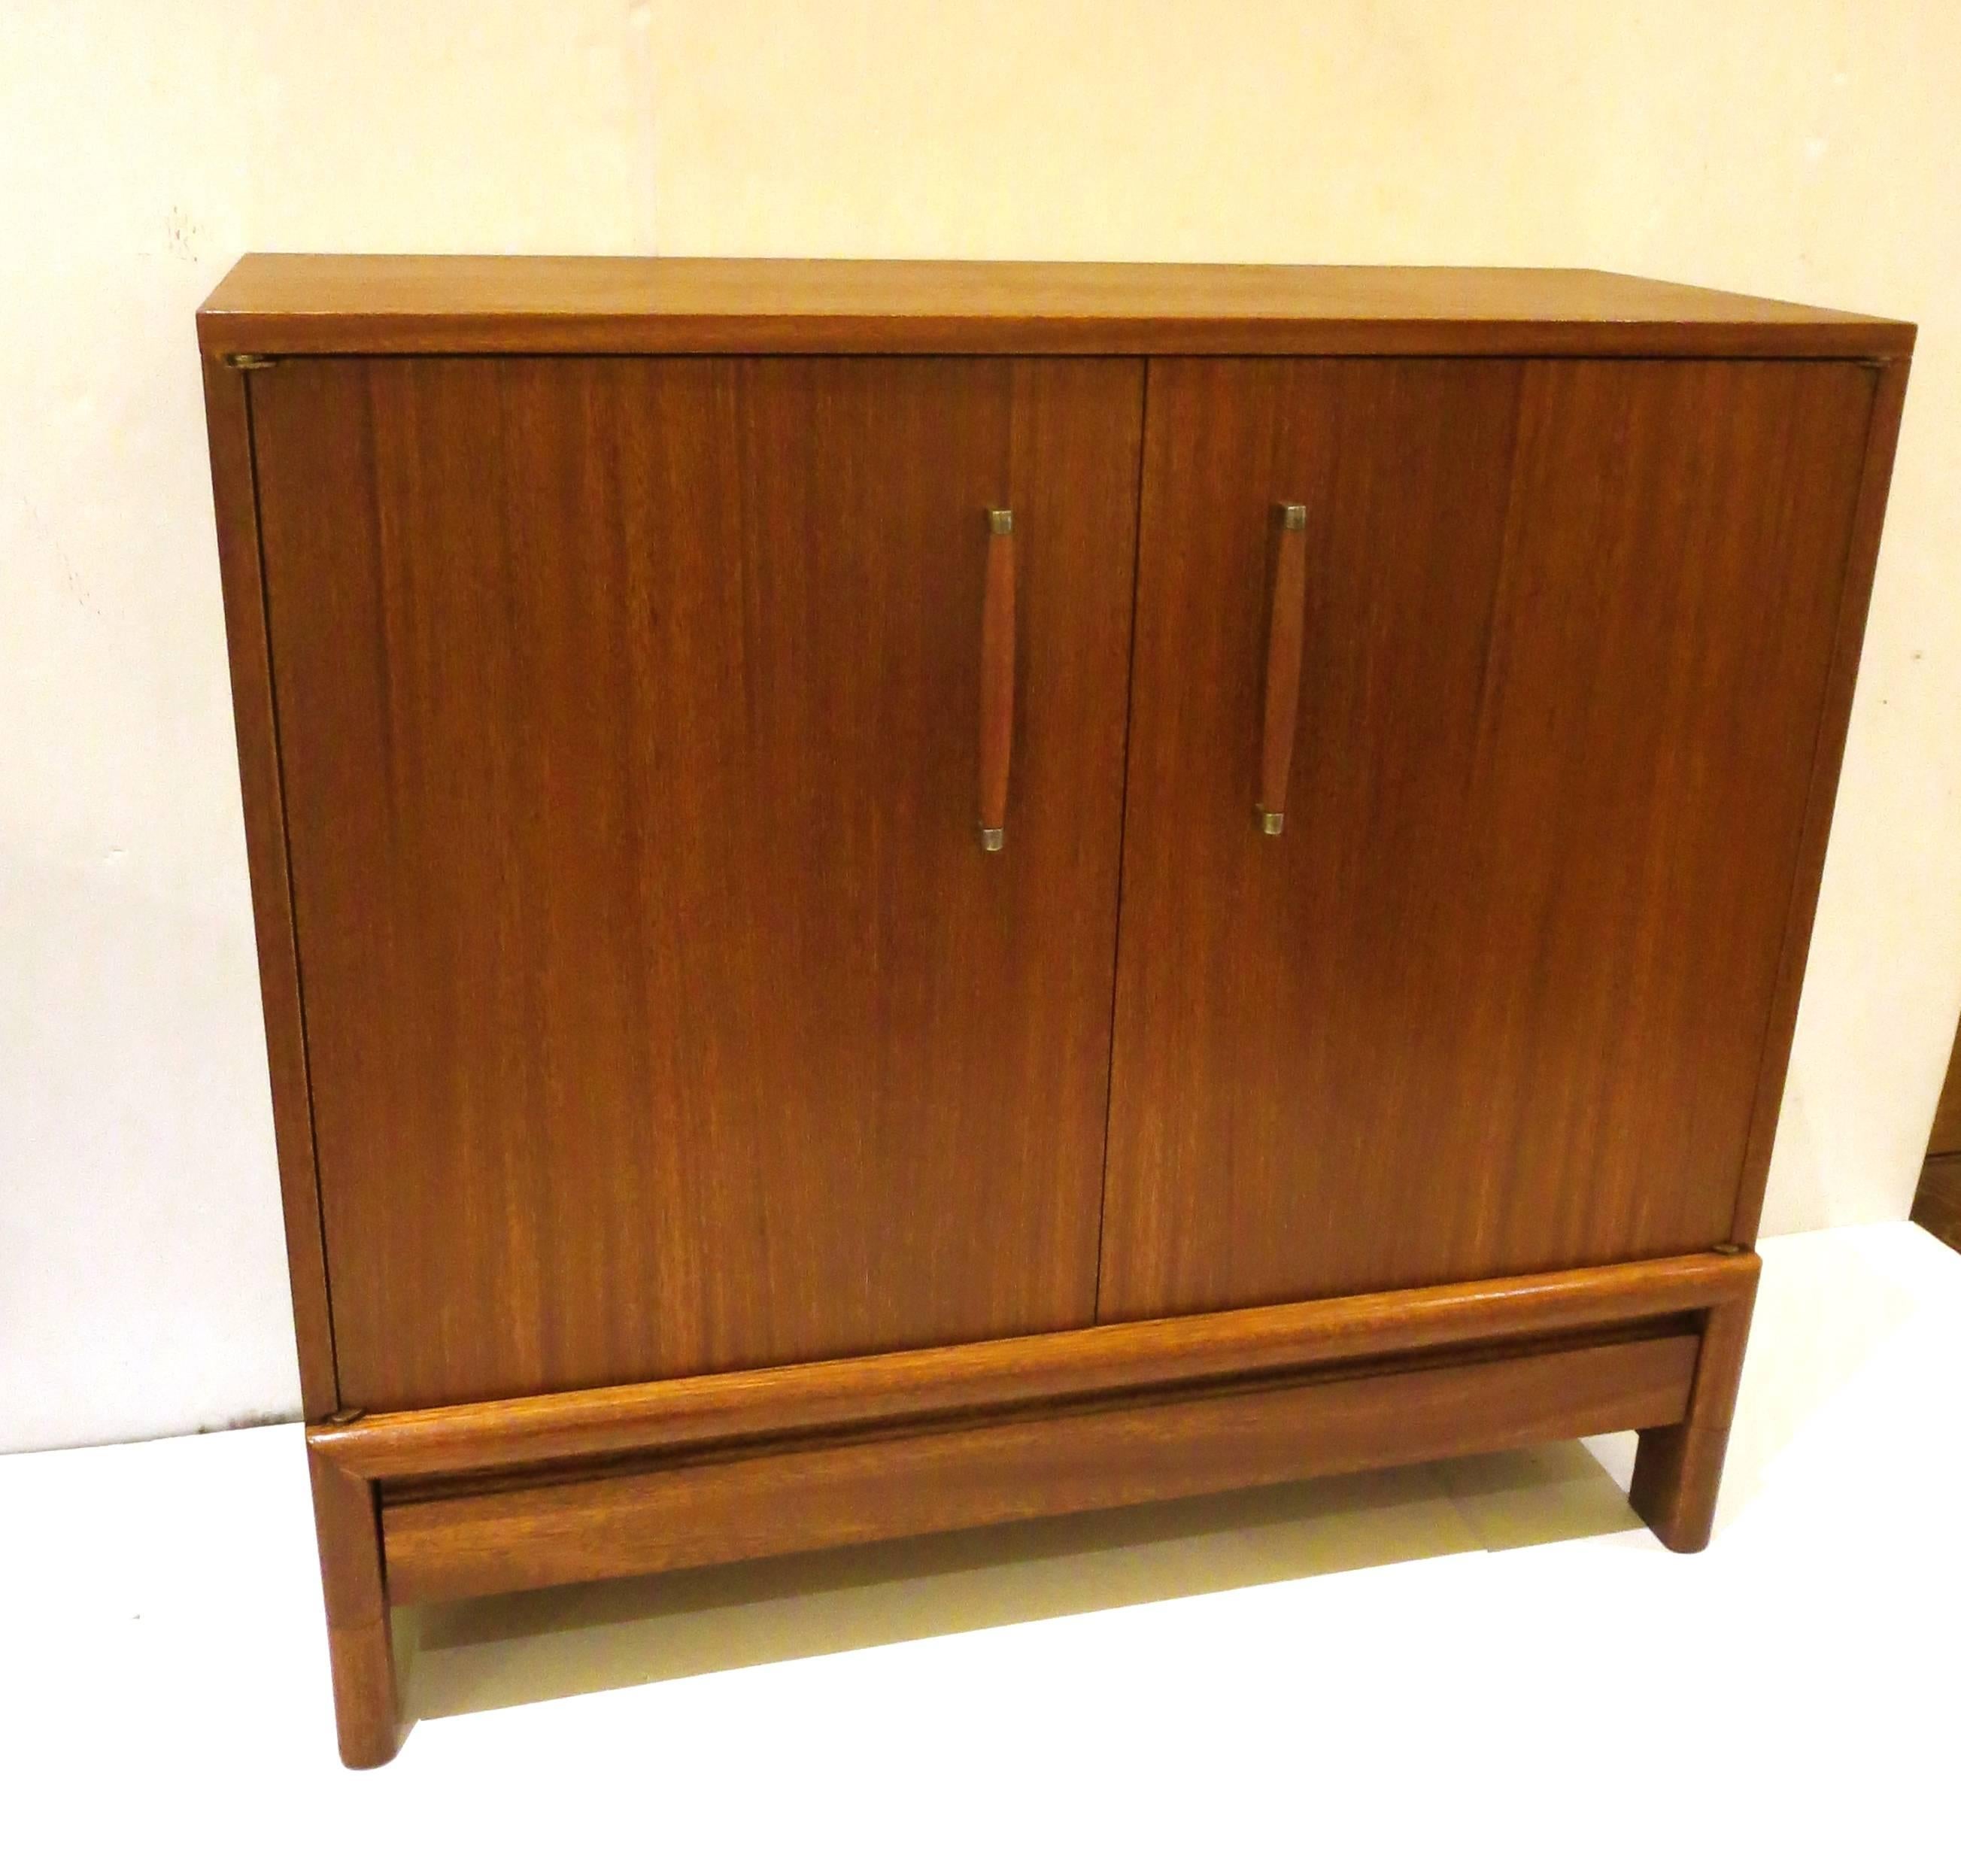 Elegant double door bar or cabinet mahogany finish, with hidden drawer, circa 1950s, freshly refinished with its original label, designed by John Keal for Brown Saltman, great condition and rare item.